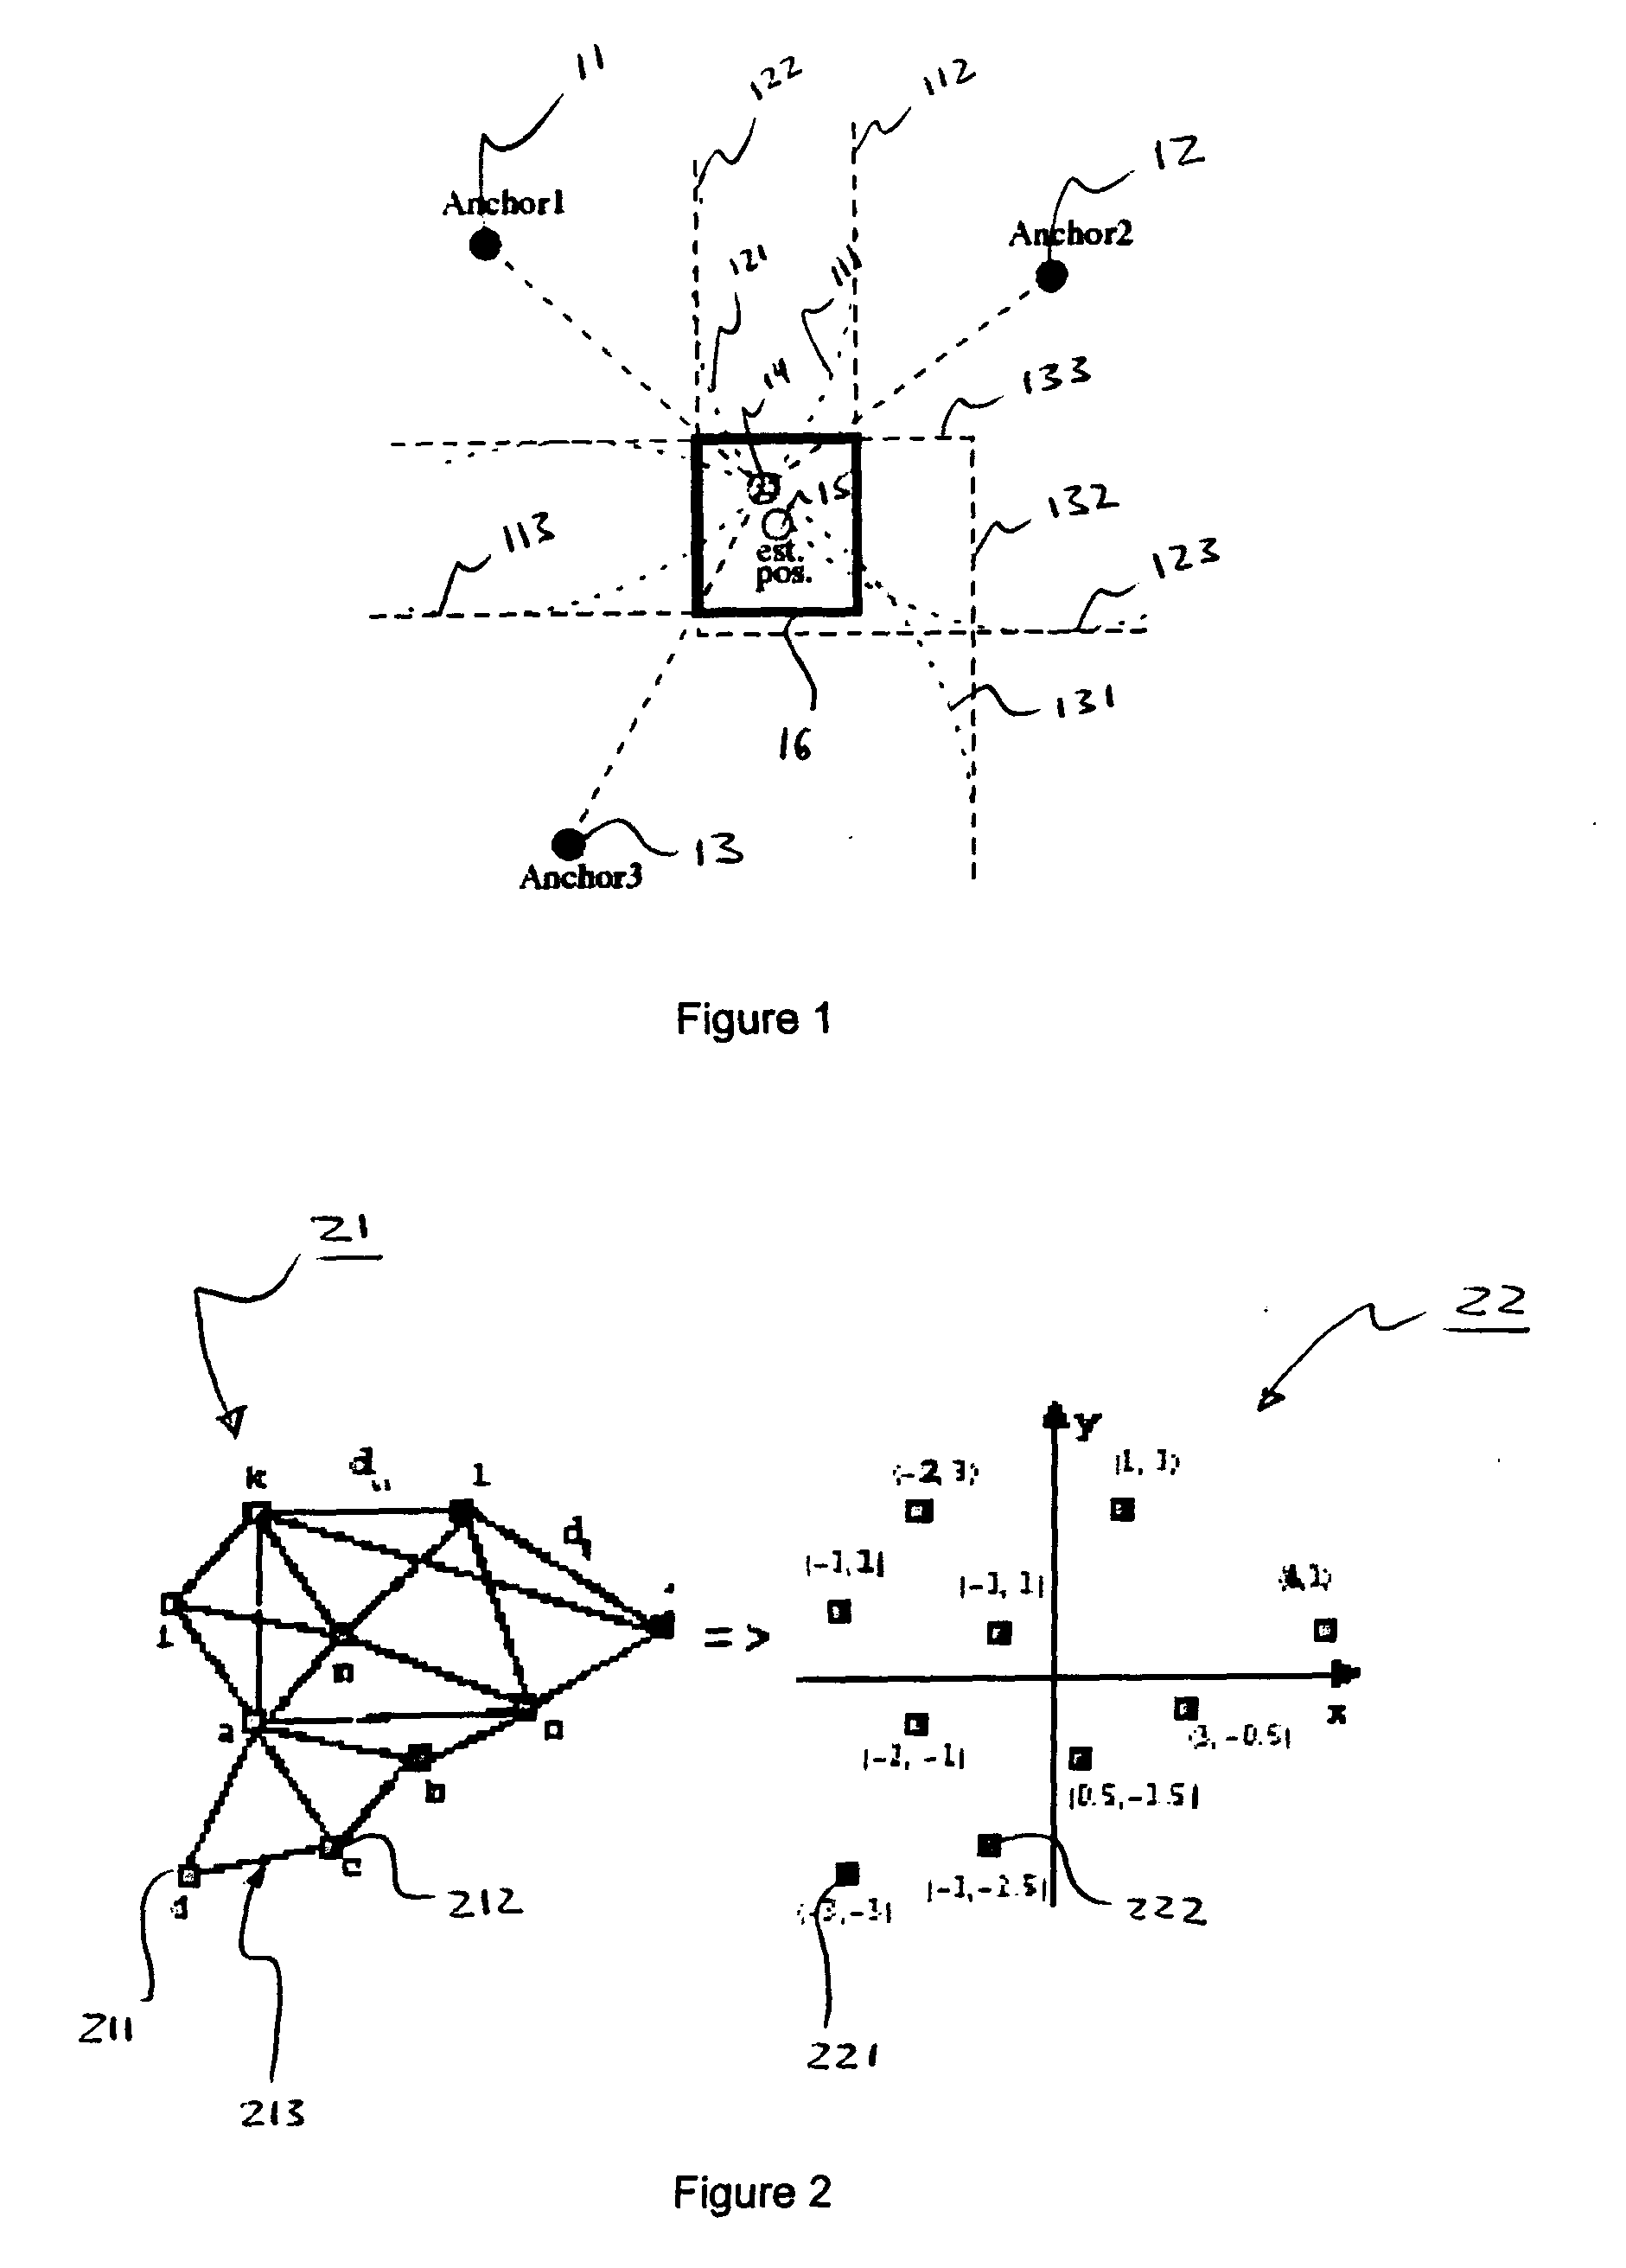 Relative 3D Positioning in an Ad-Hoc Network Based on Distances